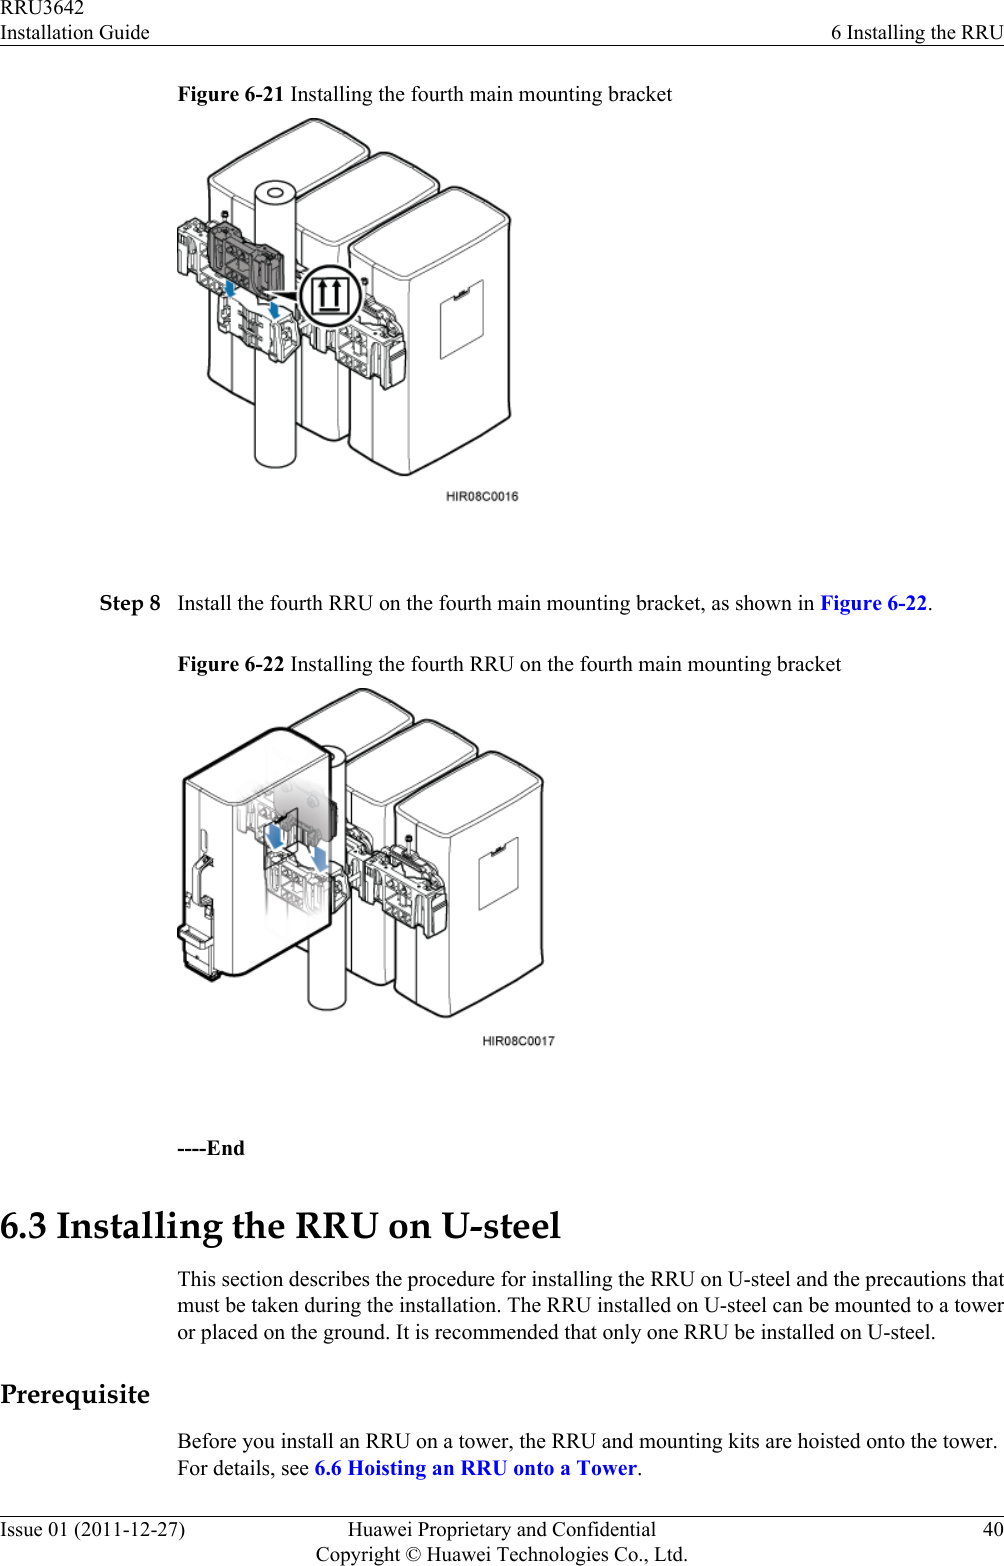 Figure 6-21 Installing the fourth main mounting bracket Step 8 Install the fourth RRU on the fourth main mounting bracket, as shown in Figure 6-22.Figure 6-22 Installing the fourth RRU on the fourth main mounting bracket ----End6.3 Installing the RRU on U-steelThis section describes the procedure for installing the RRU on U-steel and the precautions thatmust be taken during the installation. The RRU installed on U-steel can be mounted to a toweror placed on the ground. It is recommended that only one RRU be installed on U-steel.PrerequisiteBefore you install an RRU on a tower, the RRU and mounting kits are hoisted onto the tower.For details, see 6.6 Hoisting an RRU onto a Tower.RRU3642Installation Guide 6 Installing the RRUIssue 01 (2011-12-27) Huawei Proprietary and ConfidentialCopyright © Huawei Technologies Co., Ltd.40